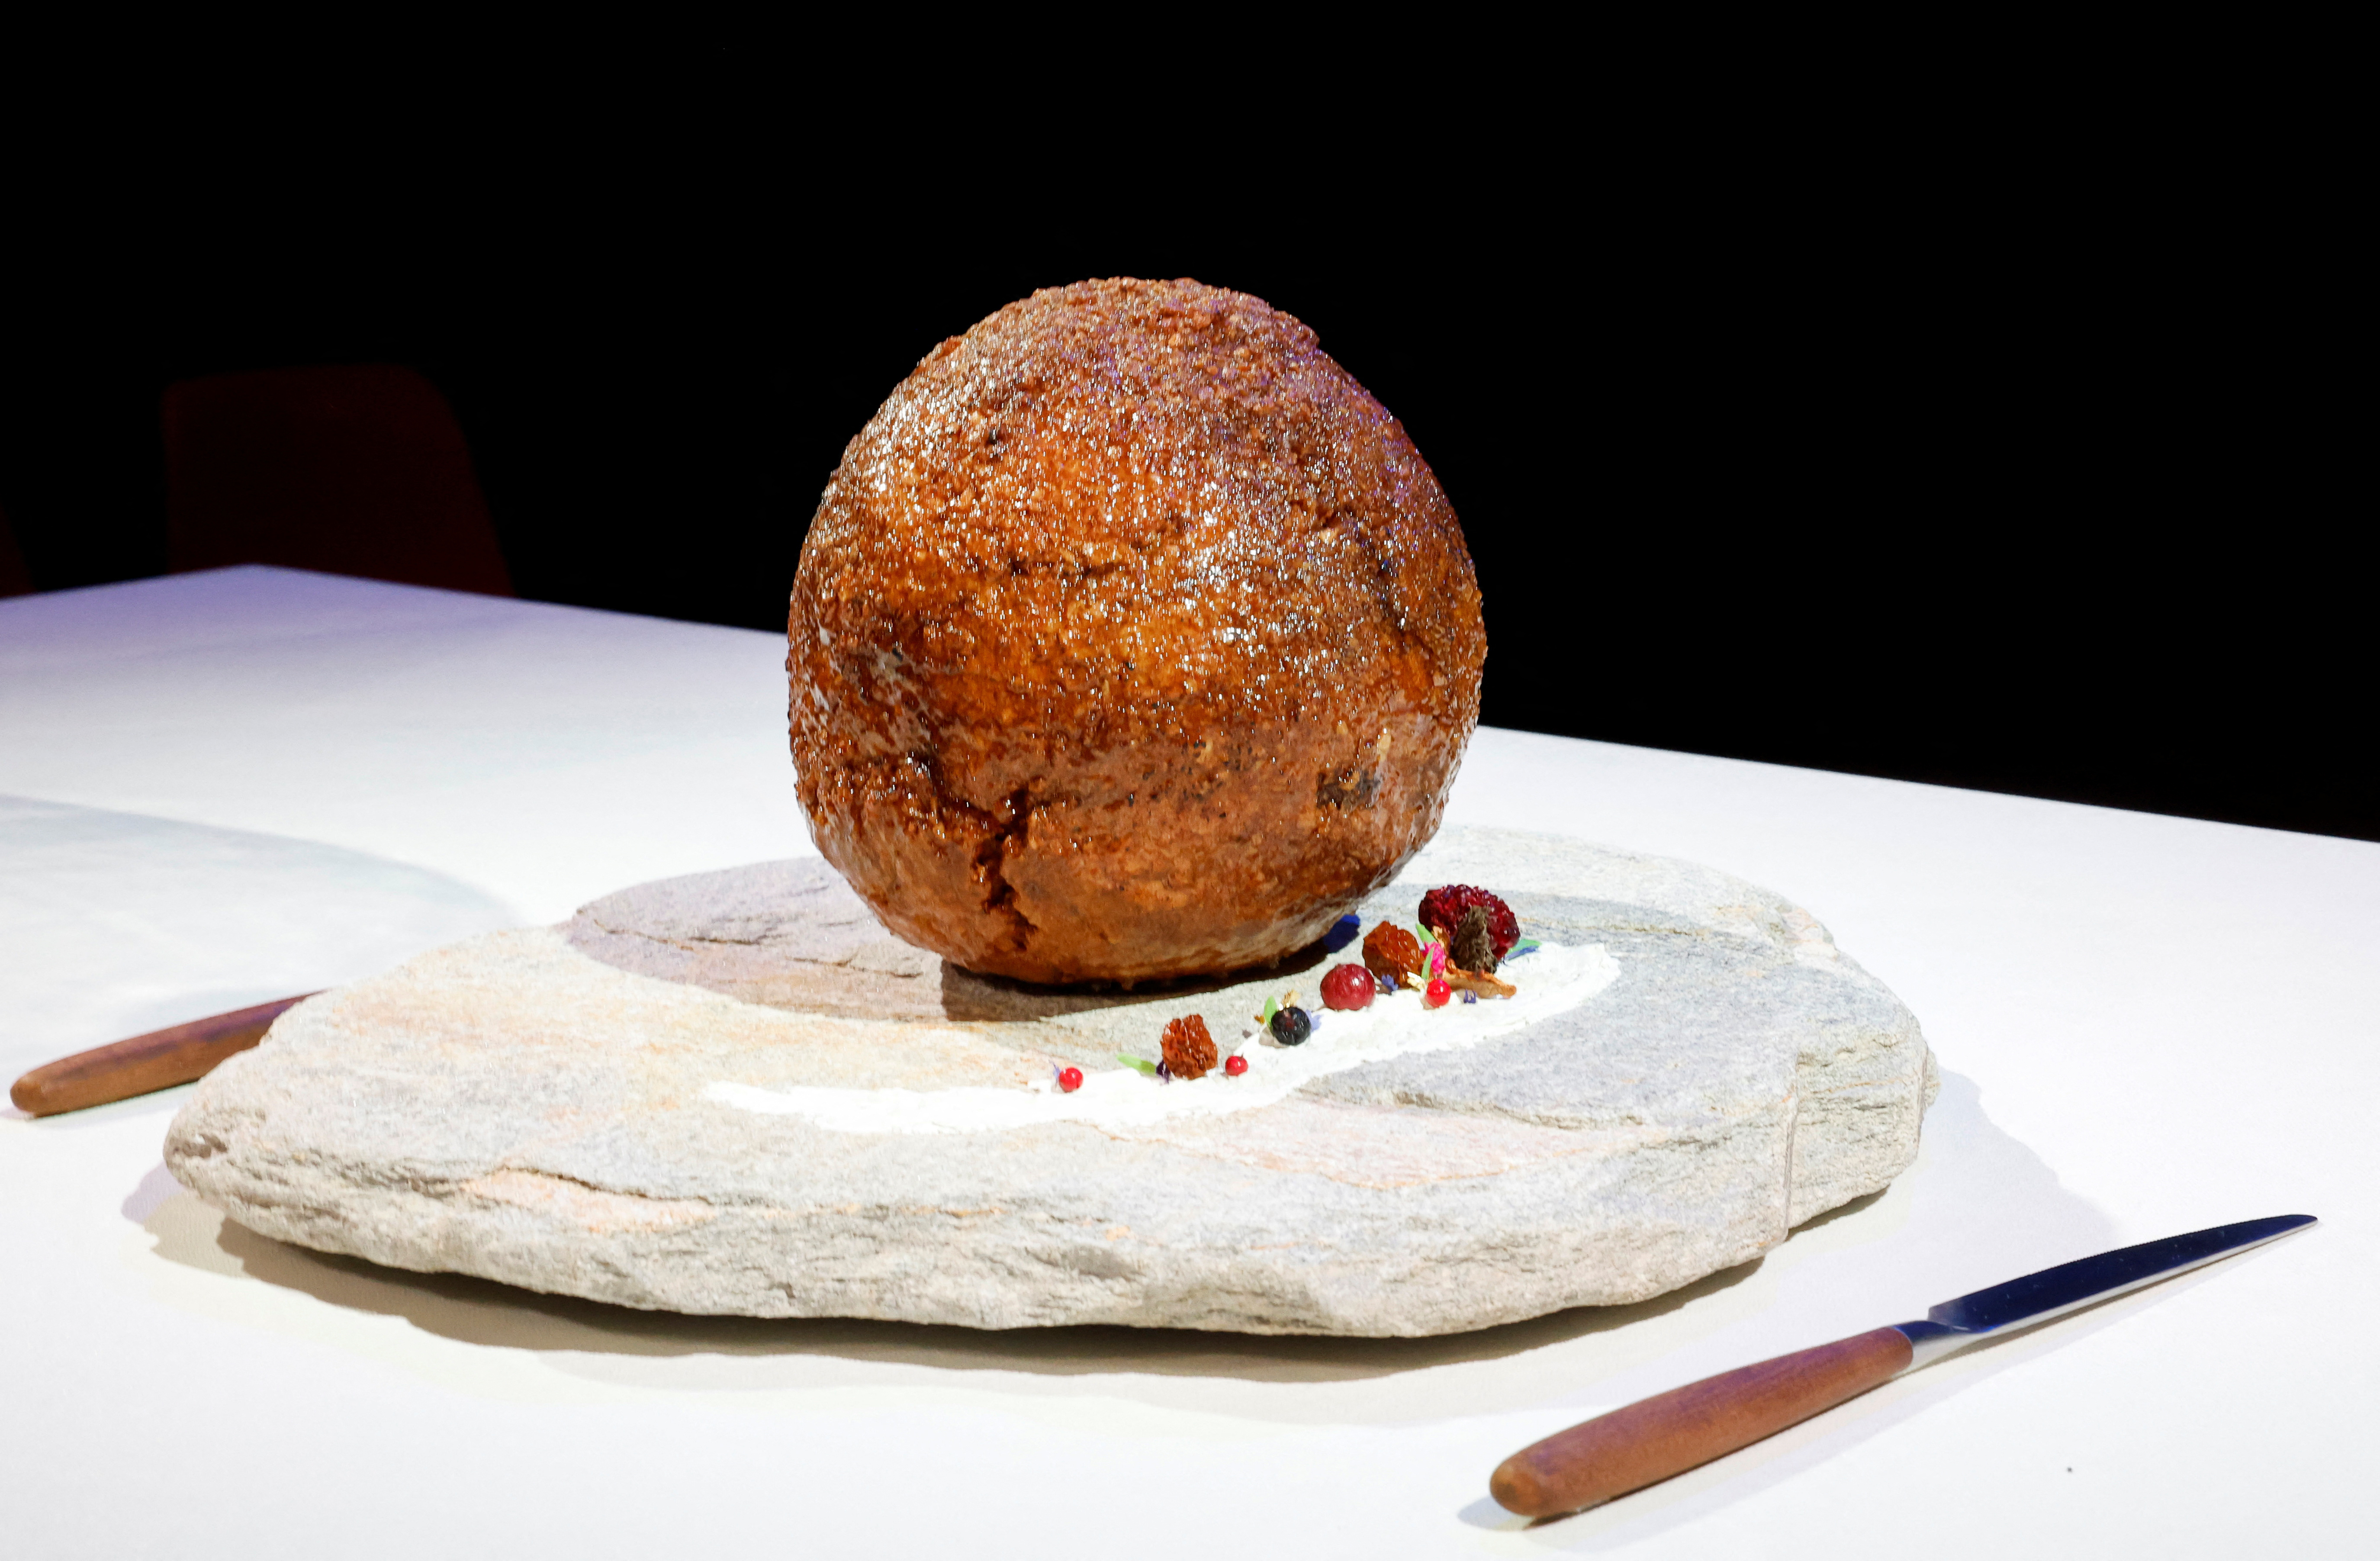 A mammoth meatball presented at NEMO Science Museum in Amsterdam